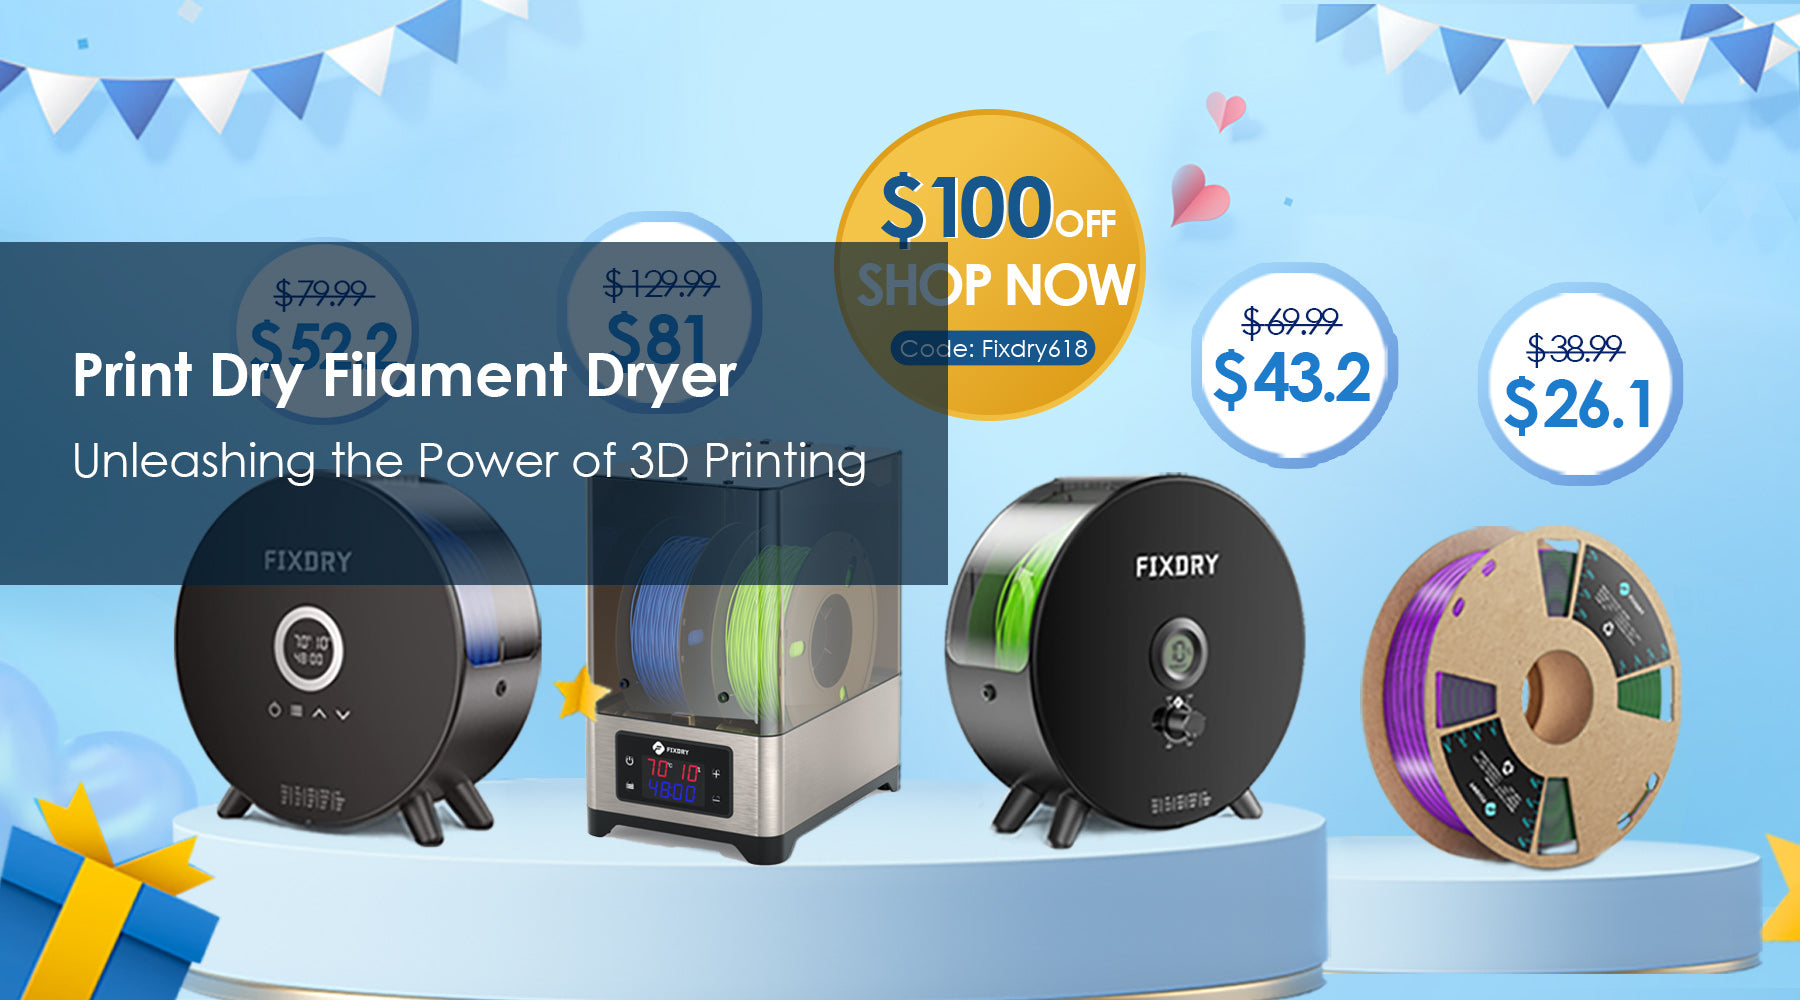 Print Dry Filament Dryer: Unleashing the Power of 3D Printing